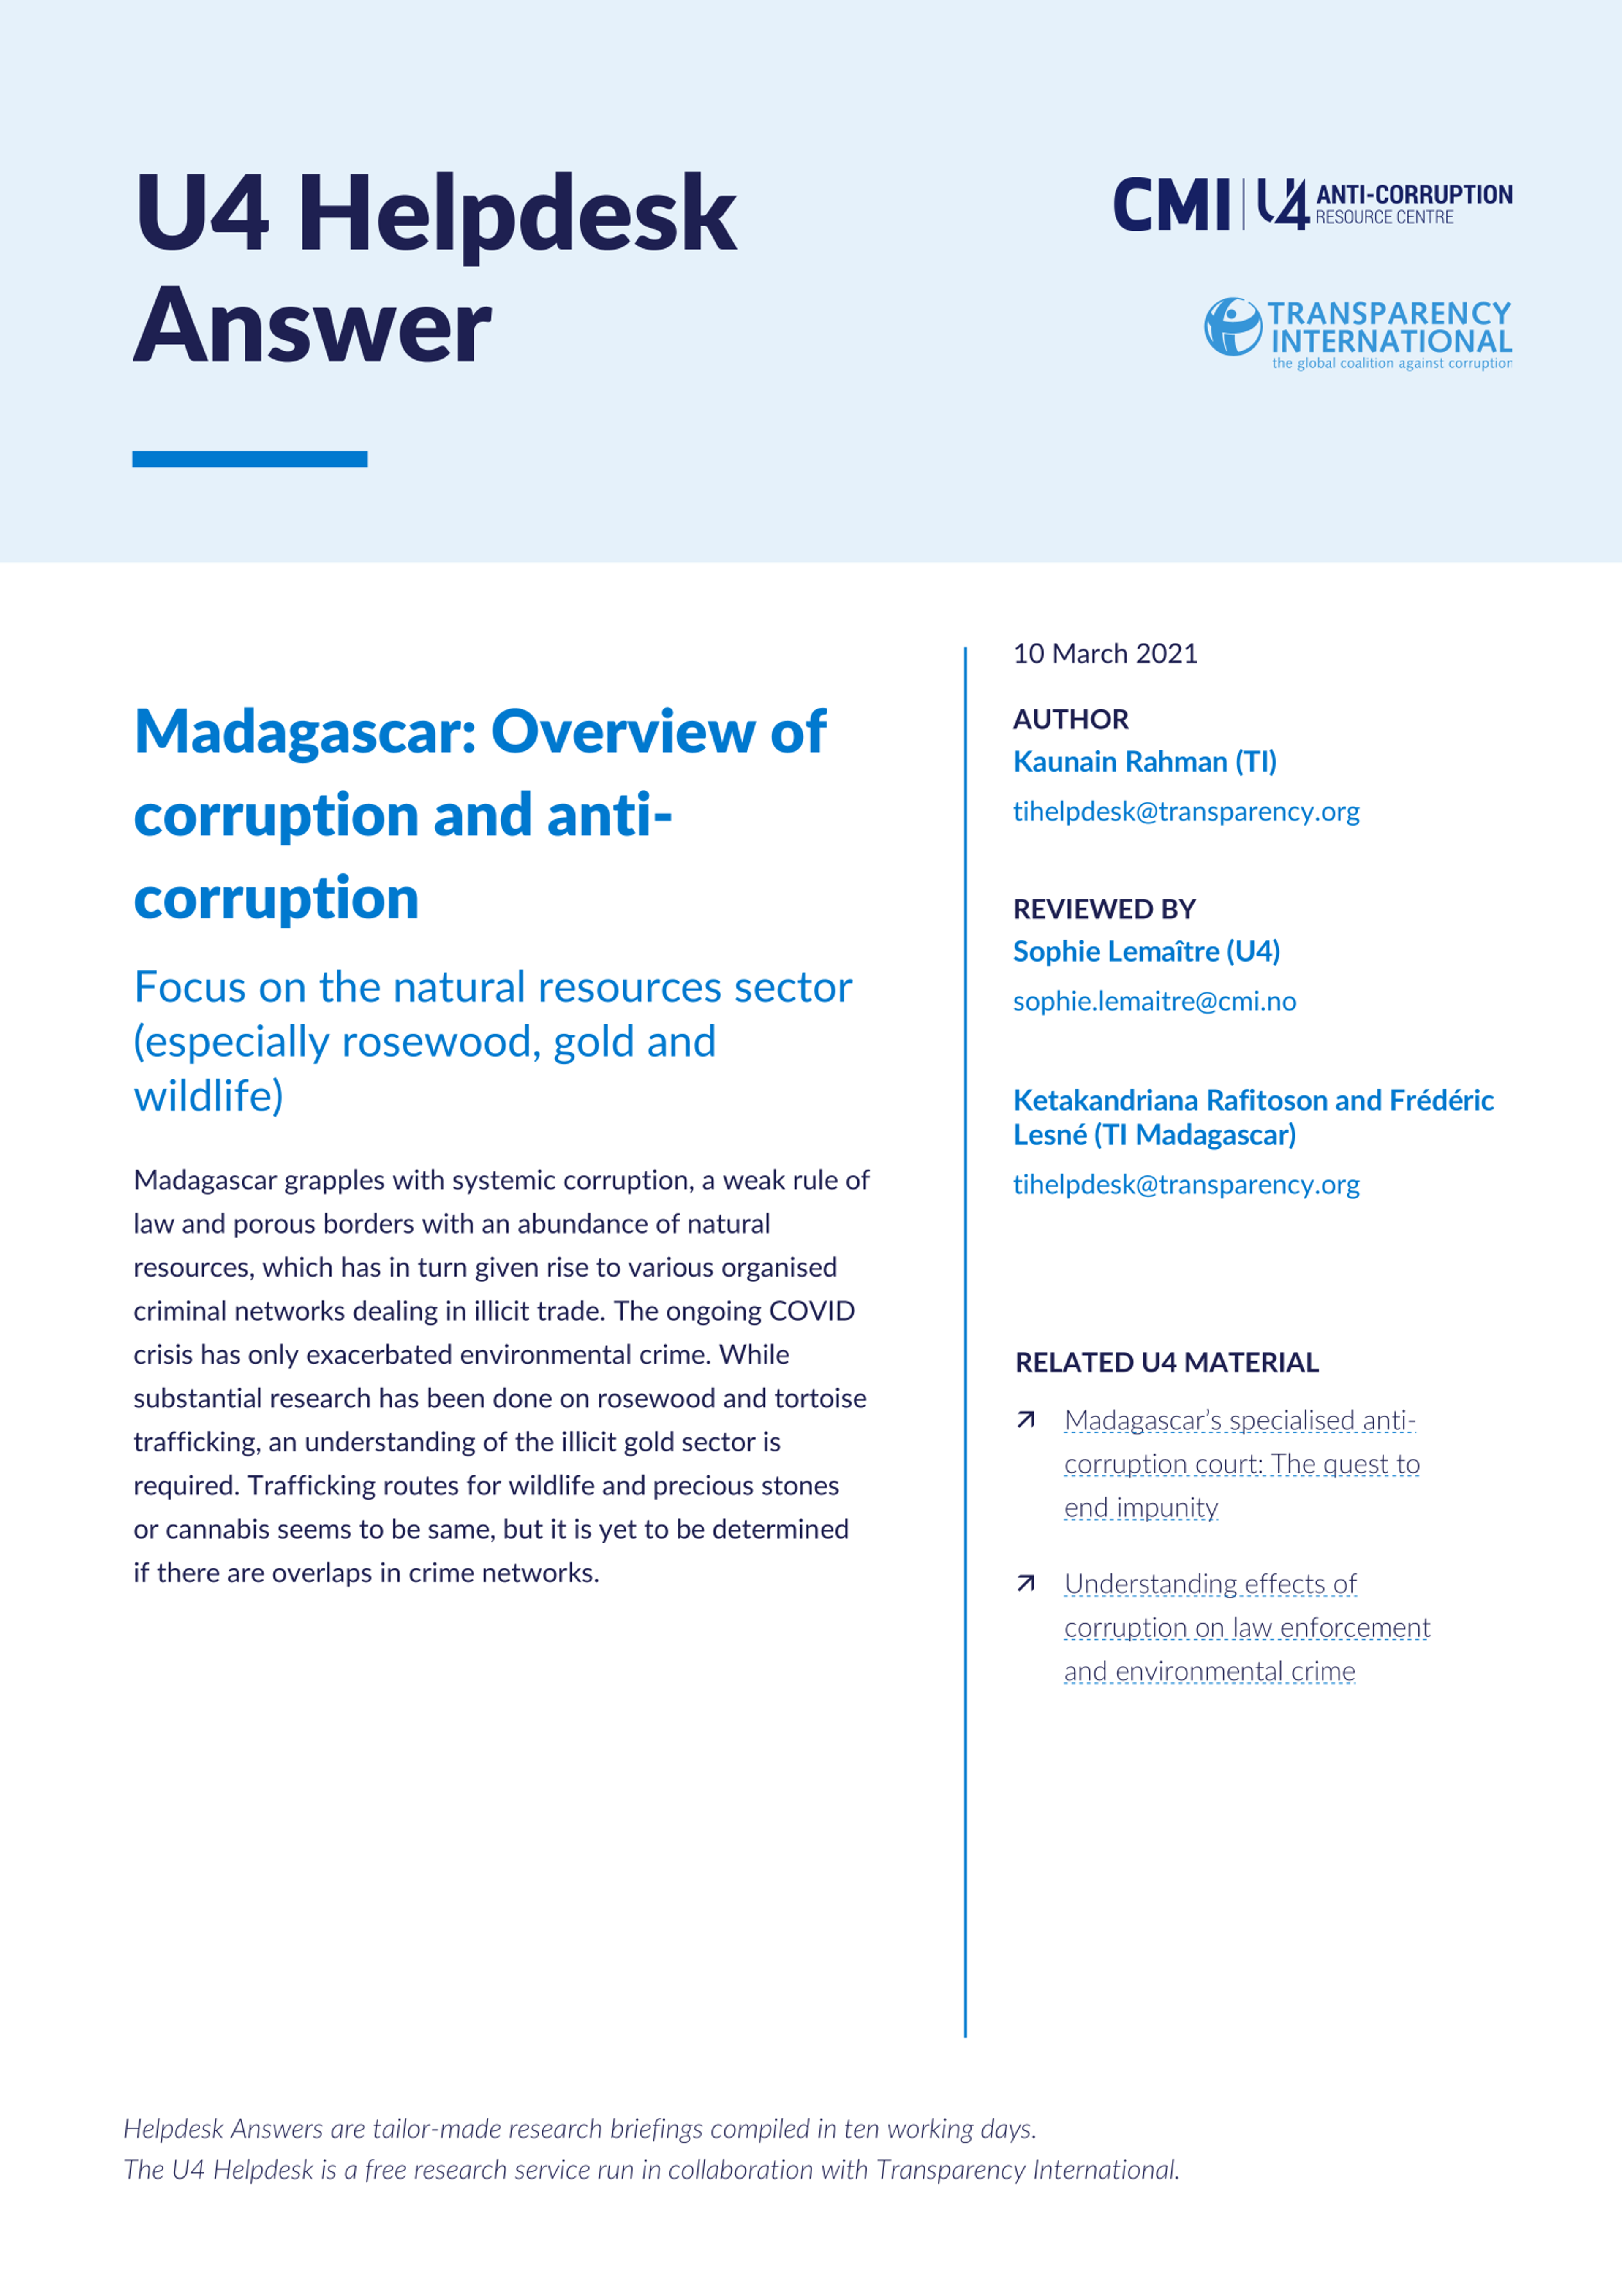 Madagascar: Overview of corruption and anti-corruption